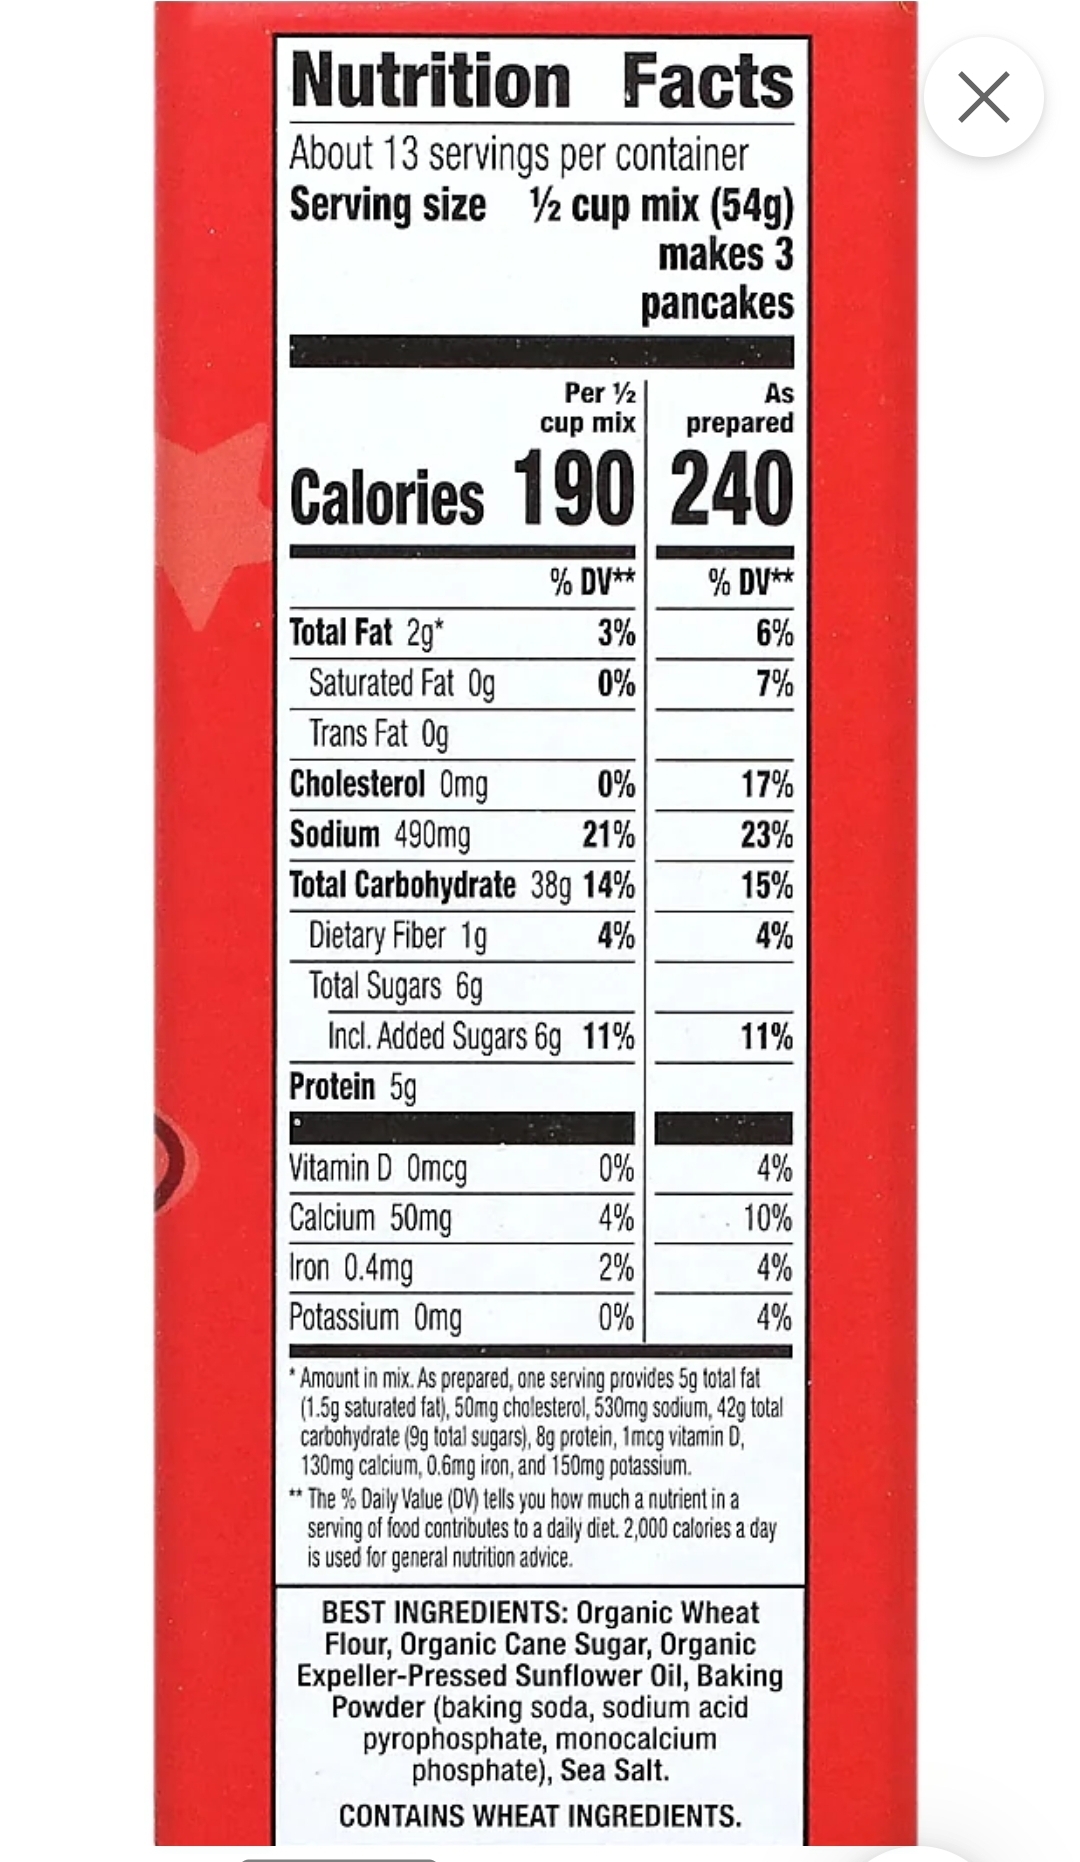 Nutrition Facts
About 13 servings per container
Serving size 1/2 cup mix (54g)
makes 3
pancakes
As
prepared
Calories 190 240
Total Fat 29*
Per 12
cup mix
Protein 5g
Saturated Fat Og
Trans Fat Og
Cholesterol Omg
0%
Sodium 490mg
21%
Total Carbohydrate 38g 14%
Dietary Fiber 1g
4%
Total Sugars 6g
Incl. Added Sugars 6g 11%
Vitamin D Omcg
Calcium 50mg
Iron 0.4mg
Potassium Omg
% DV**
3%
0%
0%
4%
2%
0%
%DV**
6%
7%
17%
23%
15%
4%
11%
4%
10%
4%
4%
*Amount in mix. As prepared, one serving provides 5g total fat
(1.5g saturated fat), 50mg cholesterol, 530mg sodium, 42g total
carbohydrate (9g total sugars), 8g protein, 1mcg vitamin D,
130mg calcium, 0.6mg iron, and 150mg potassium.
**The % Daily Value (DV) tells you how much a nutrient in a
serving of food contributes to a daily diet. 2,000 calories a day
is used for general nutrition advice.
BEST INGREDIENTS: Organic Wheat
Flour, Organic Cane Sugar, Organic
Expeller-Pressed Sunflower Oil, Baking
Powder (baking soda, sodium acid
pyrophosphate, monocalcium
phosphate), Sea Salt.
CONTAINS WHEAT INGREDIENTS.
X